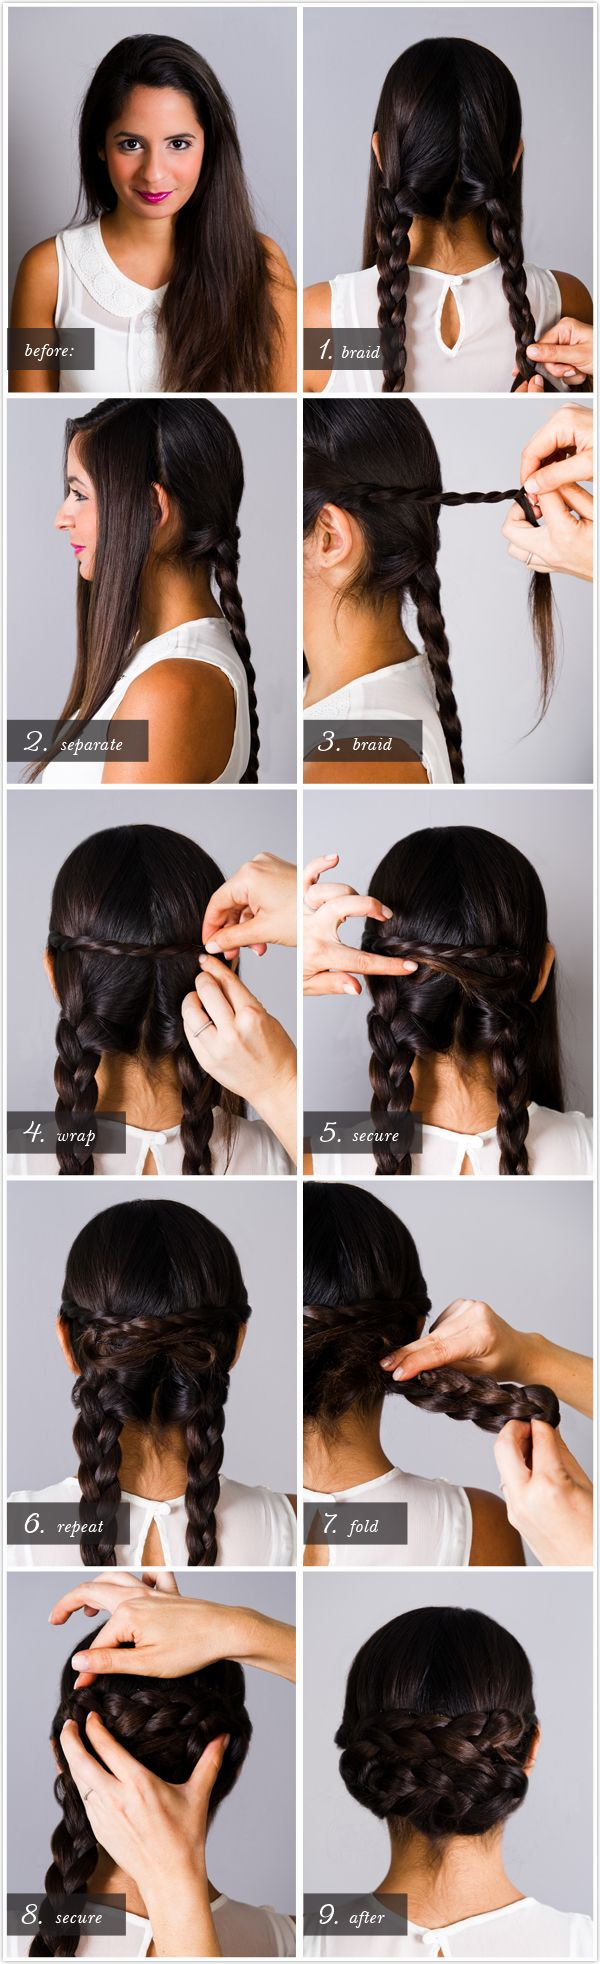 Pretty Simple Updos: Braided Chignon Hairstyle Tutorial